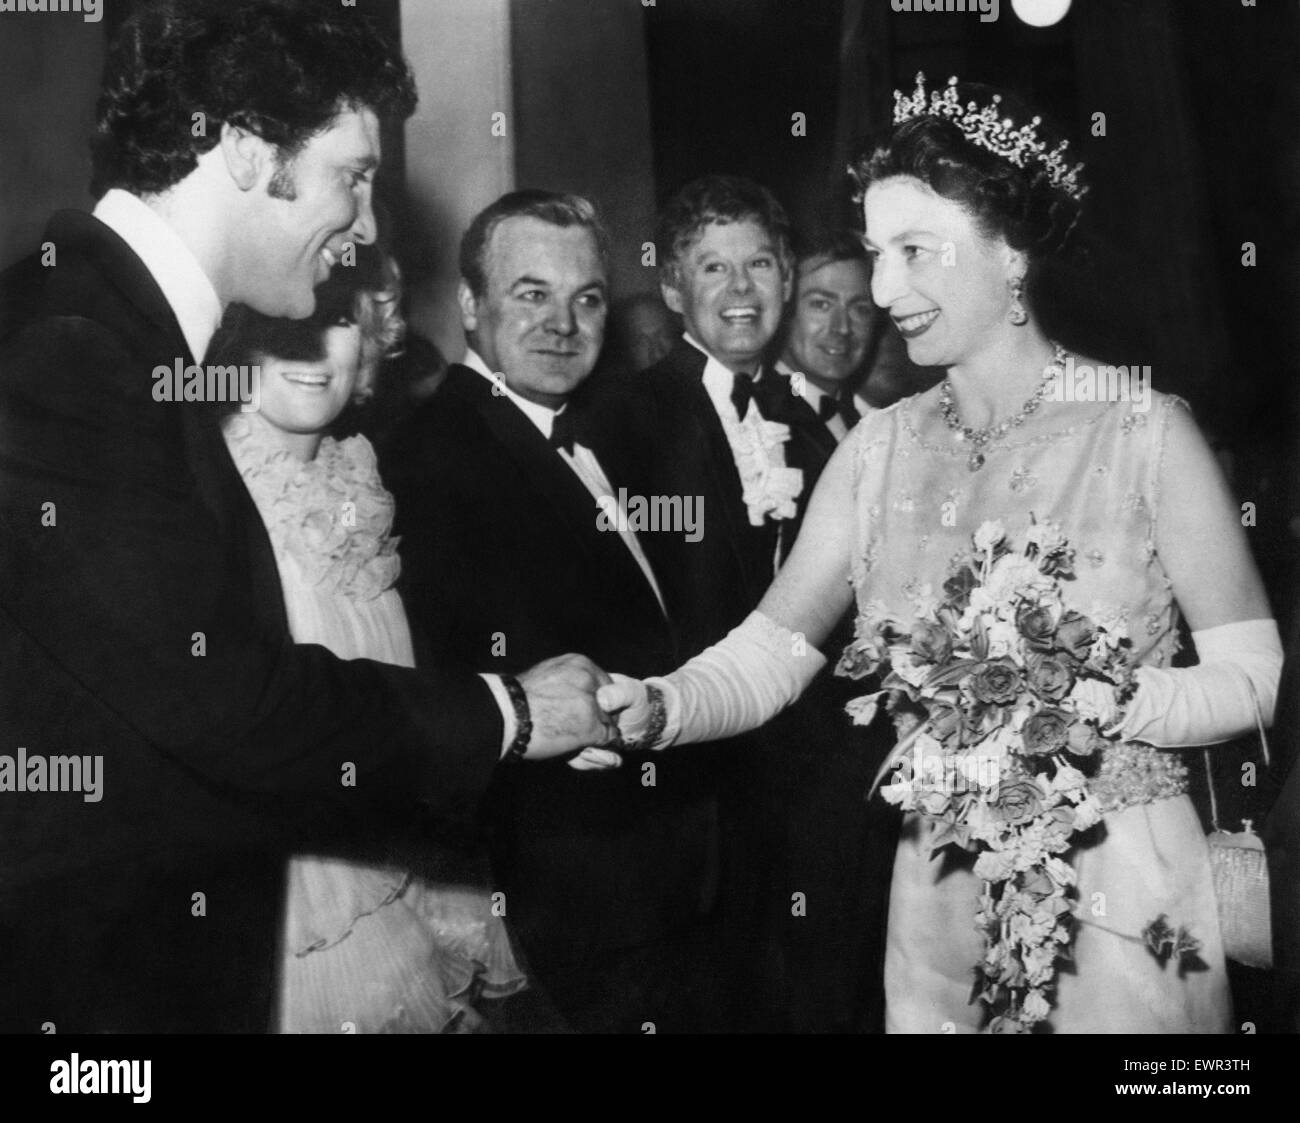 the-queen-shaking-hands-with-tom-jones-at-the-royal-variety-show-at-EWR3TH.jpg